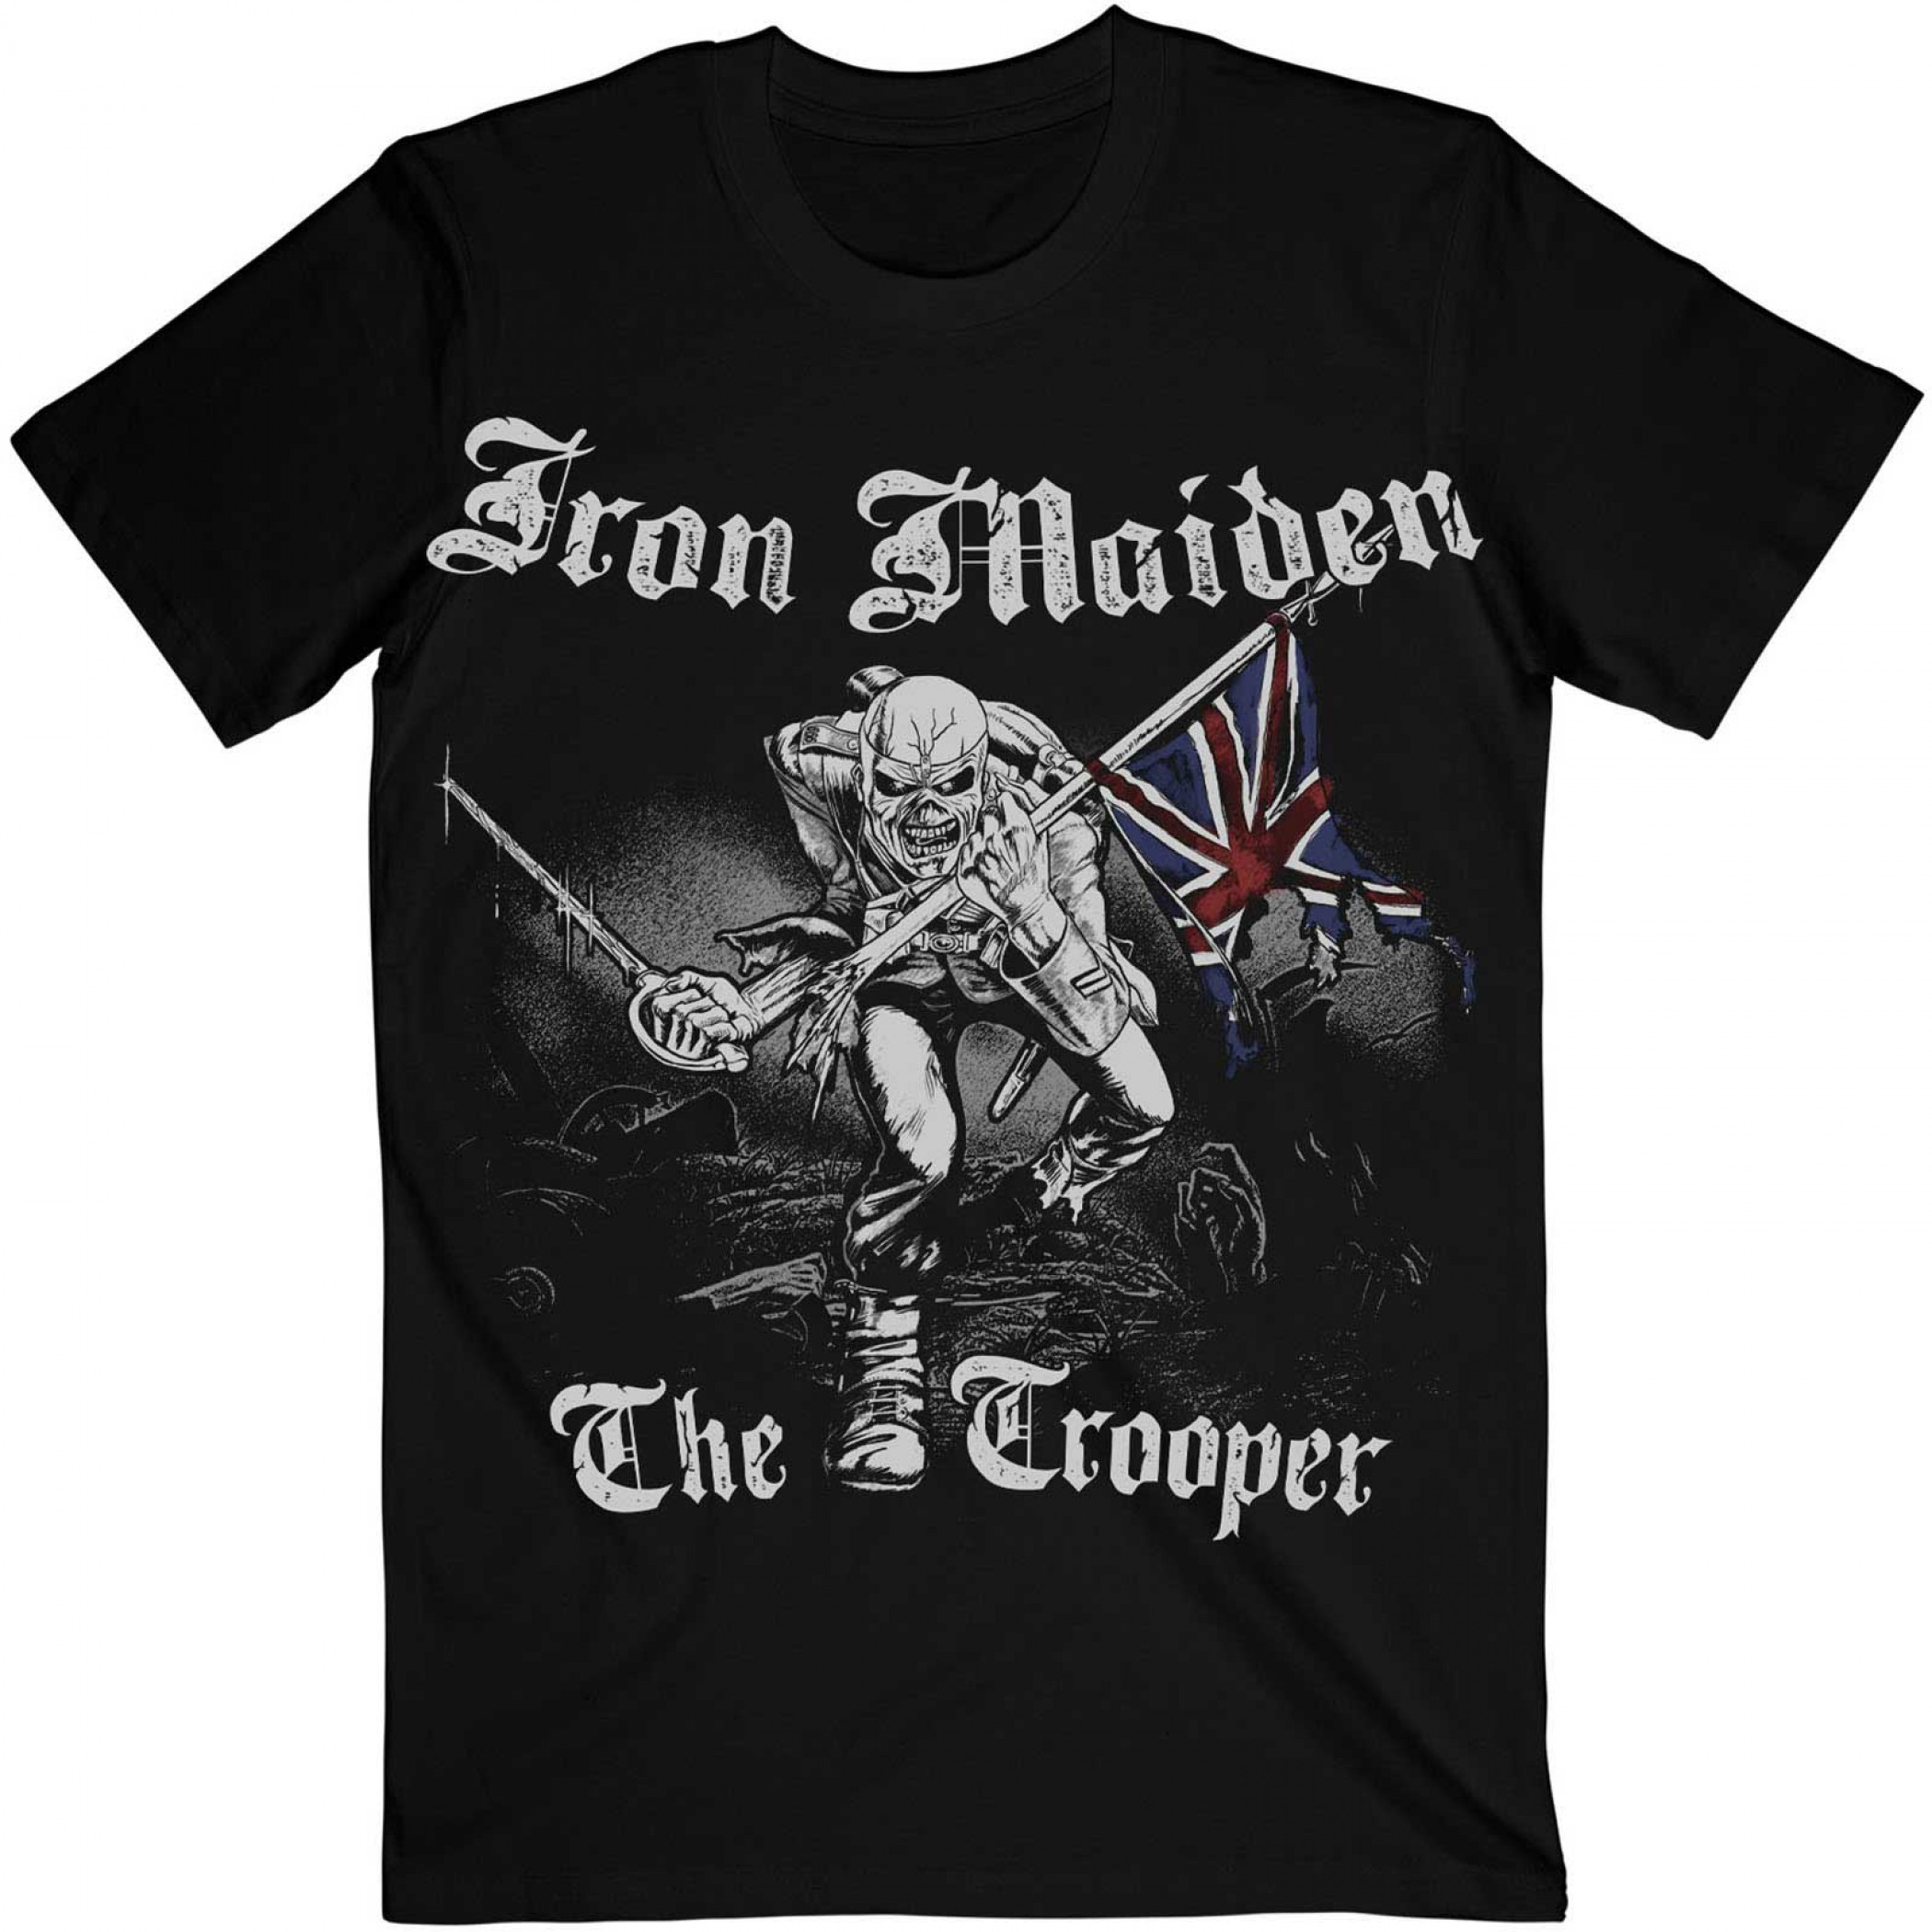 Iron Maiden The Trooper Front and Back Print T-Shirt